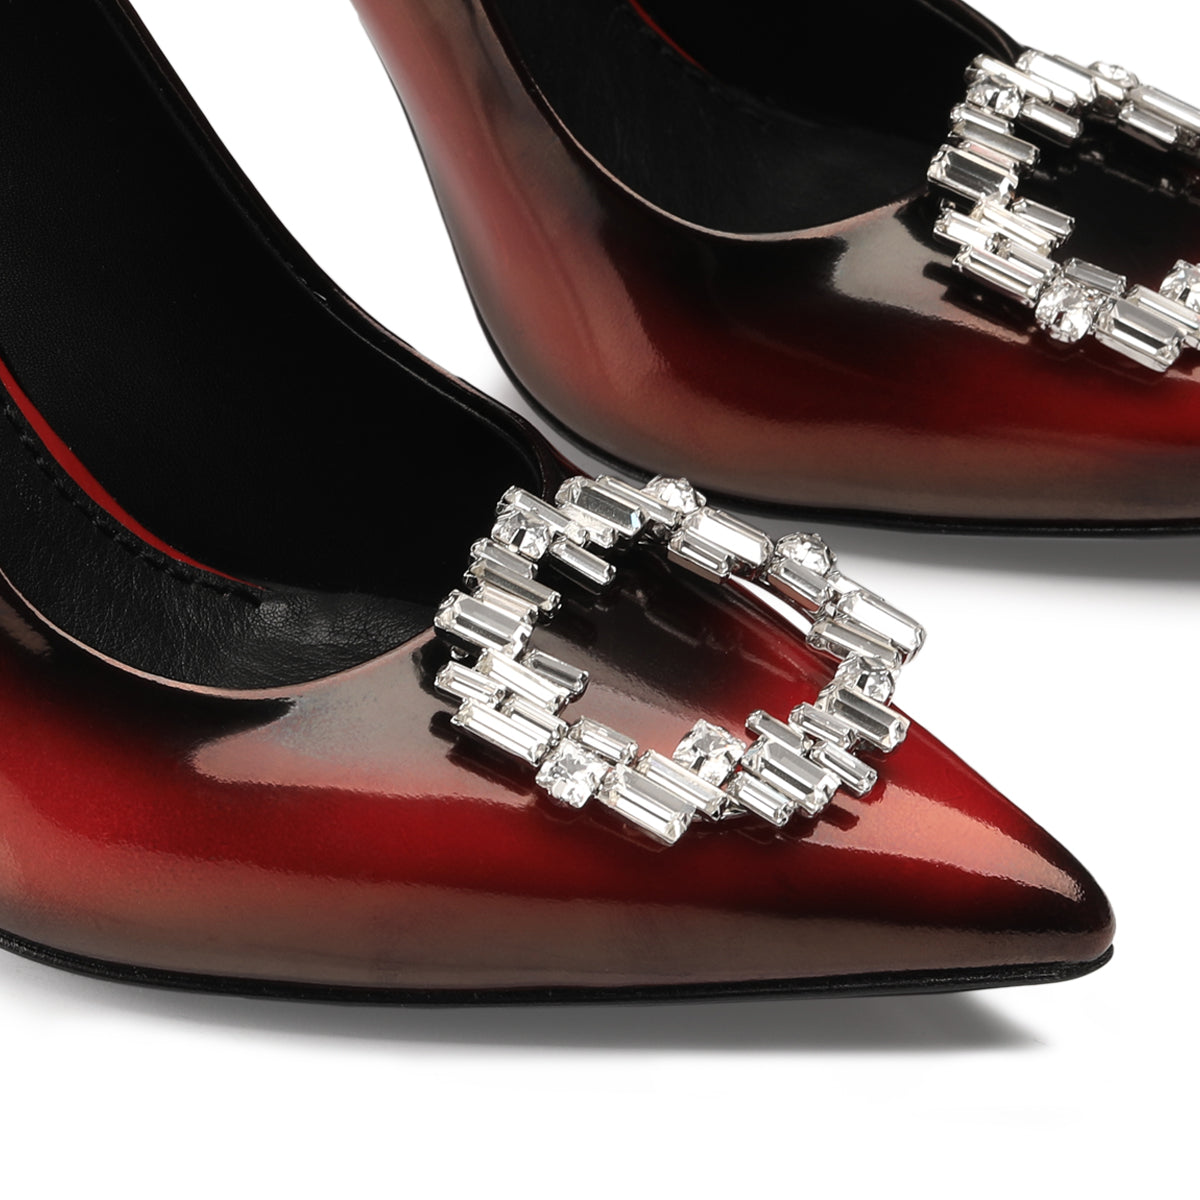 Red patinated pumps